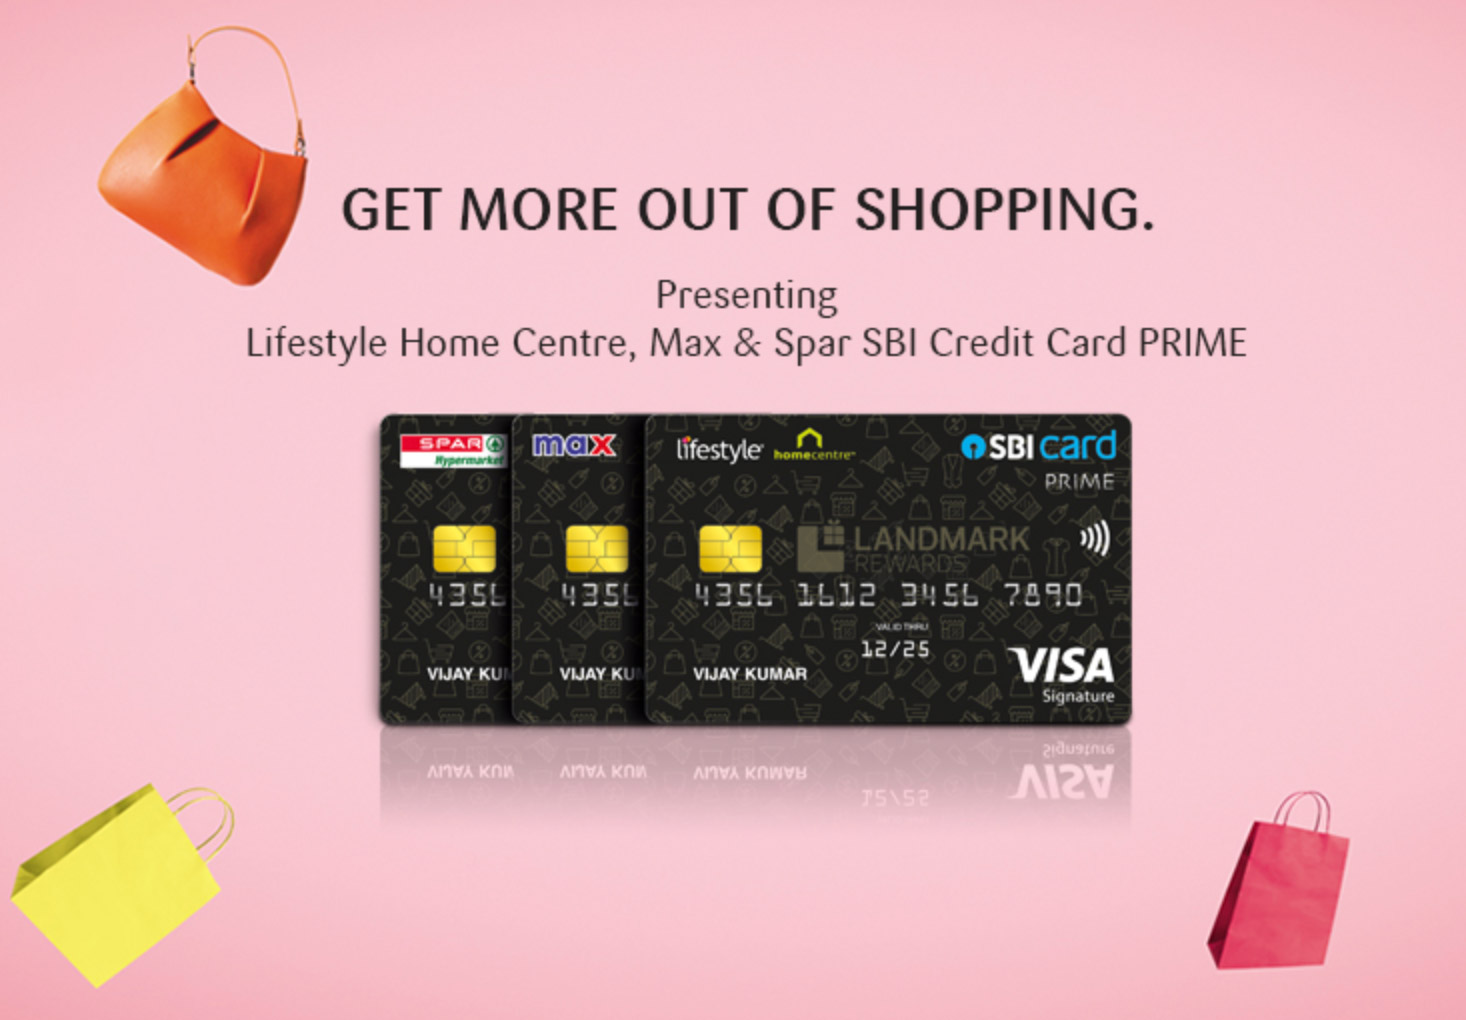 Meet The New Invite Only Super Premium Credit Card By Sbicard Aurum Cardexpert 2516